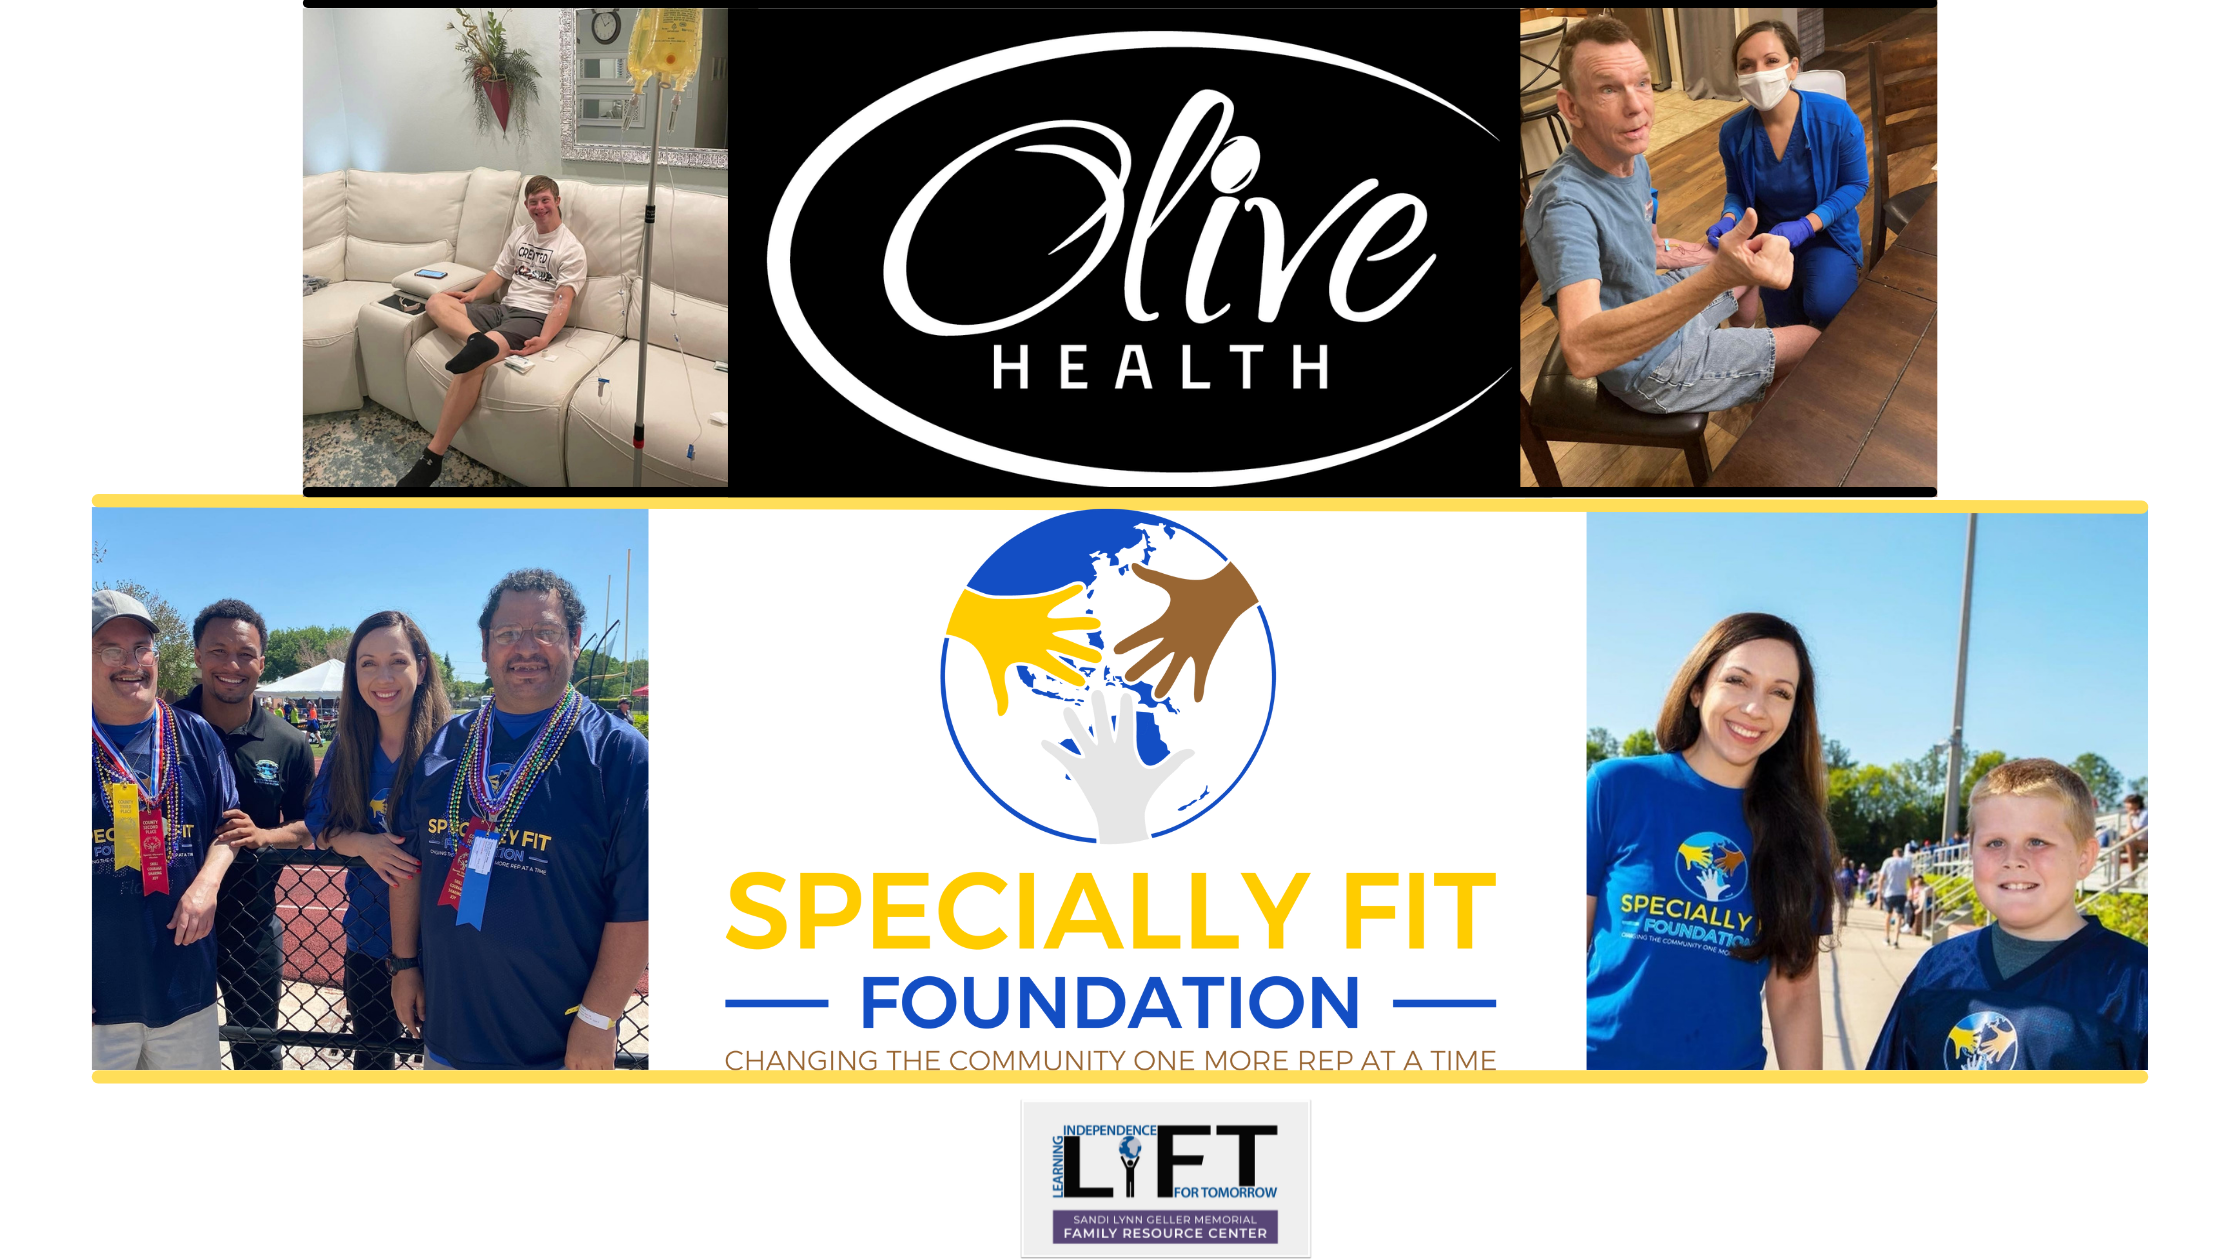 Resource Spotlight of the Month: Olive Health & Specially Fit Foundation